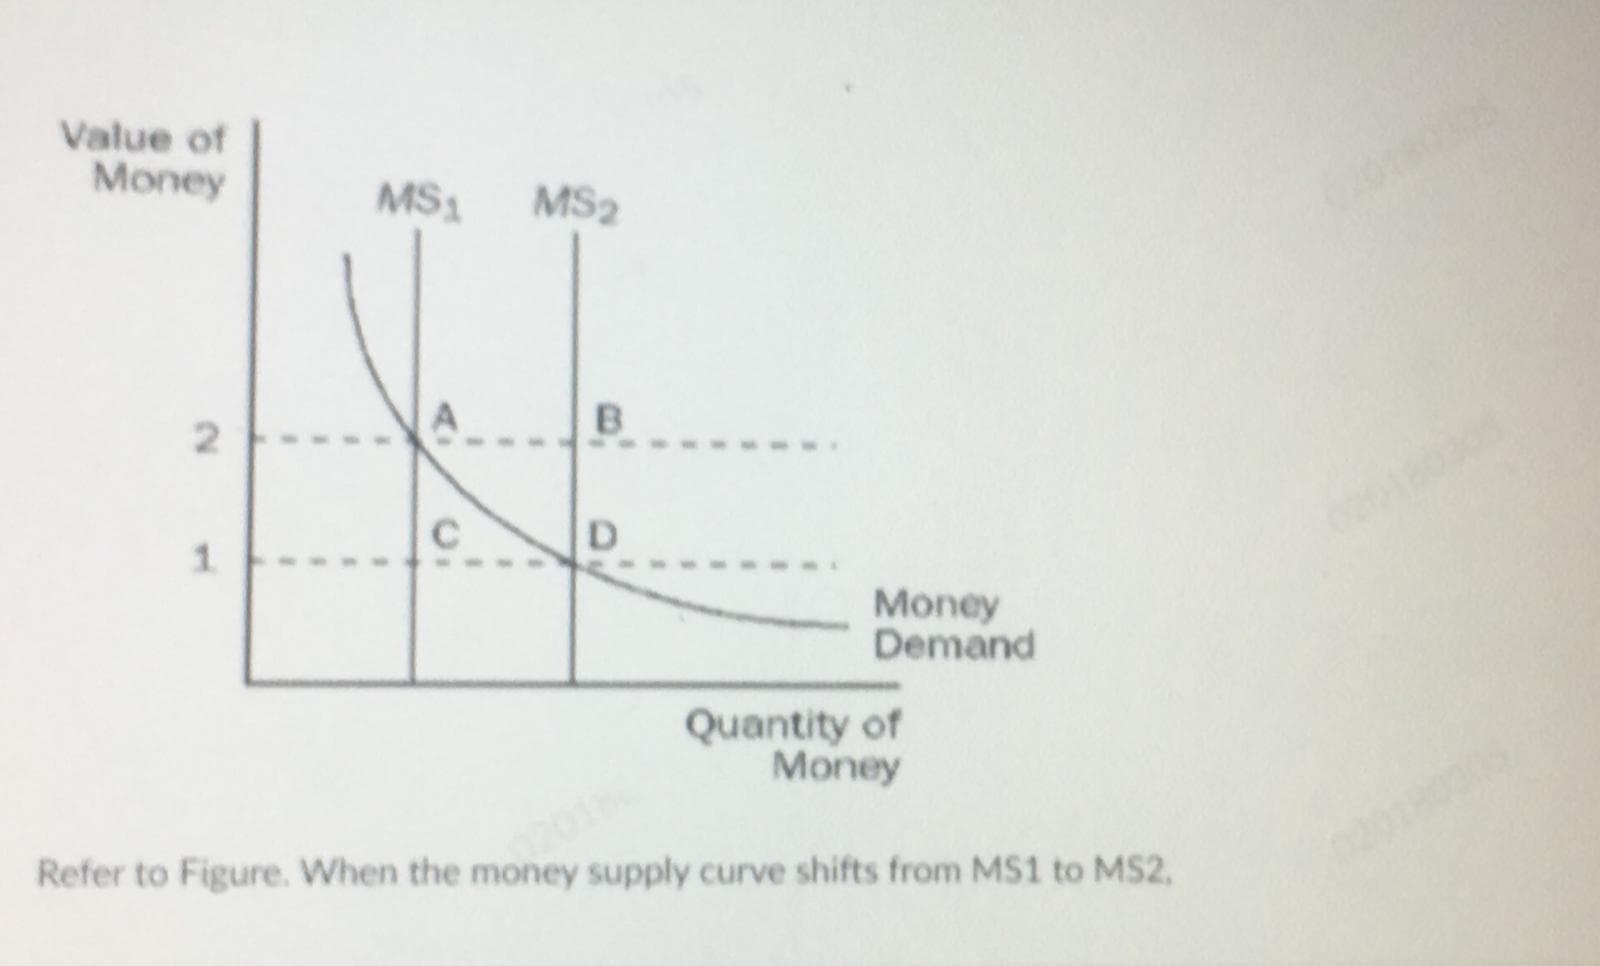 1.
Money
Demand
Quantity of
Money
2201
Refer to Figure. When the money supply curve shifts from MS1 to MS2,
020180
D.
2.
